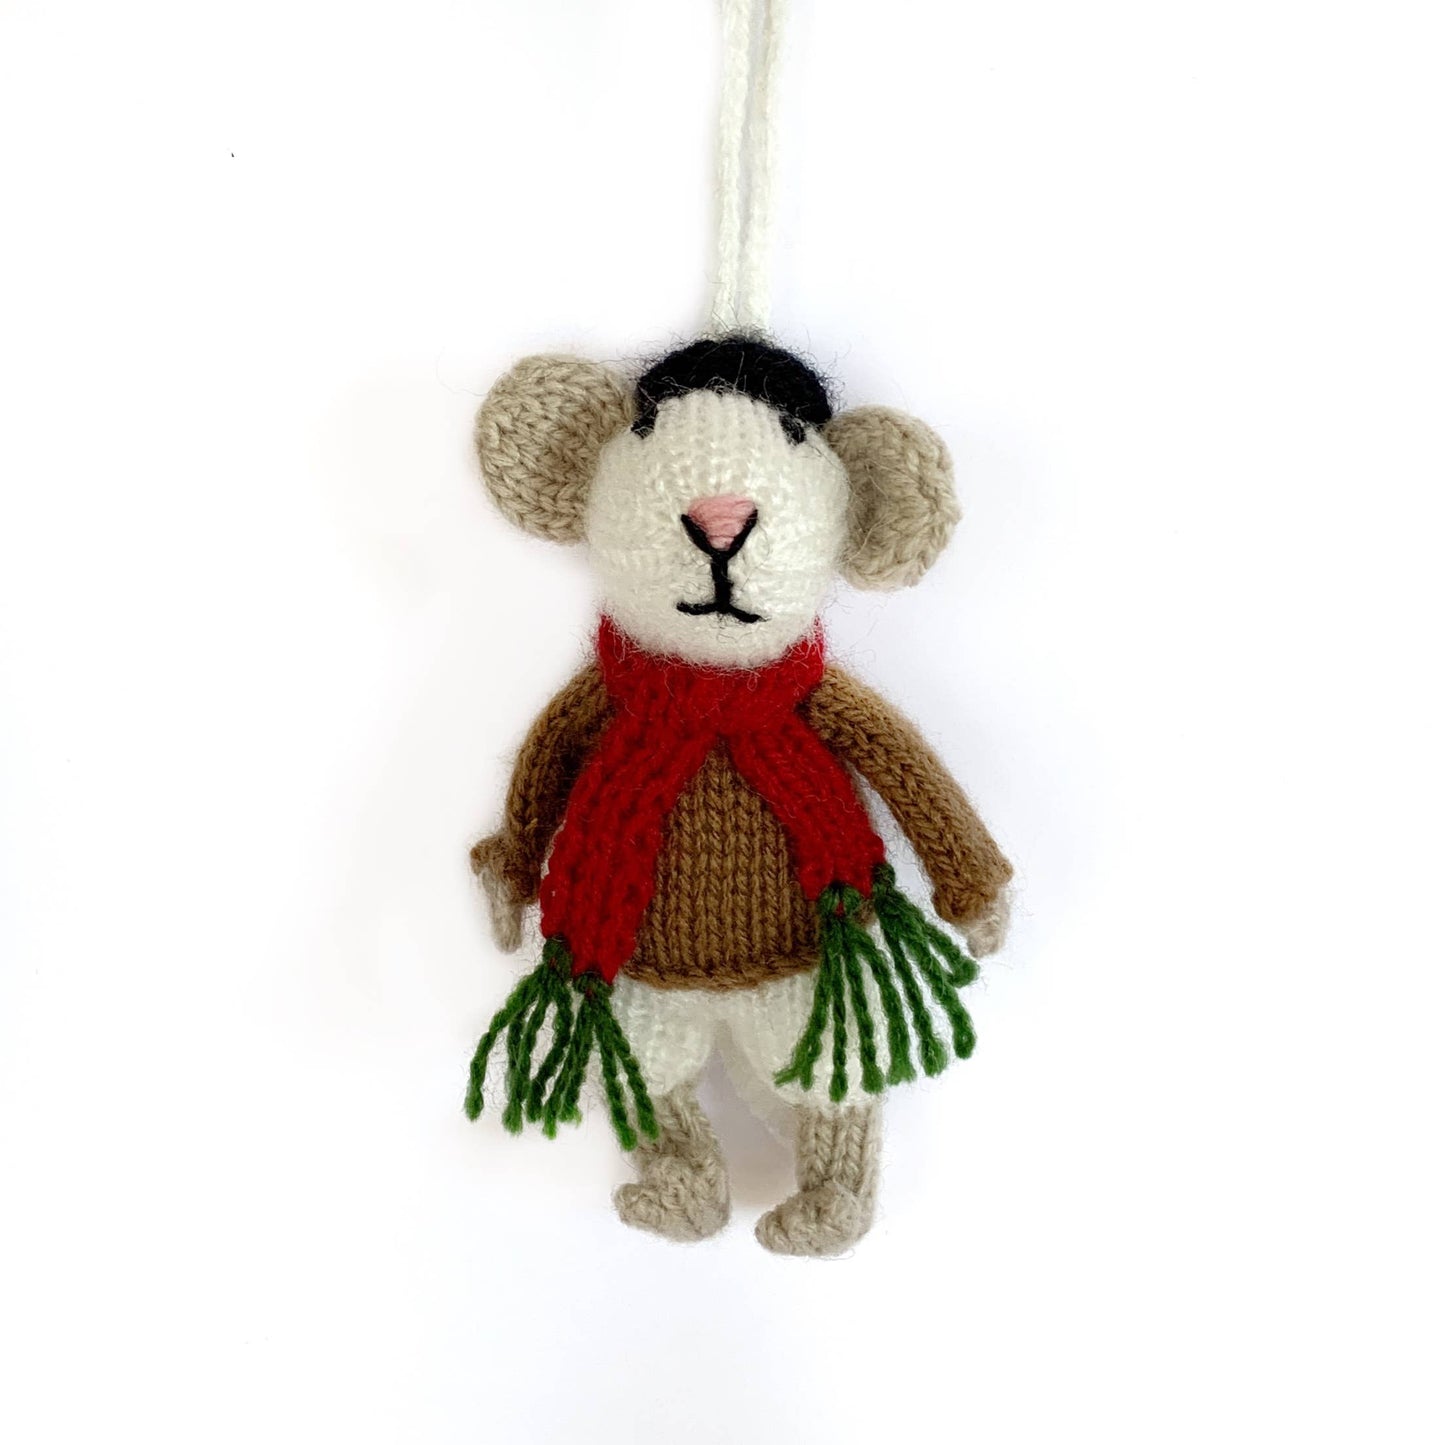 Mr. Mouse Premium Knit Wool Ornament from Ornaments 4 Orphans